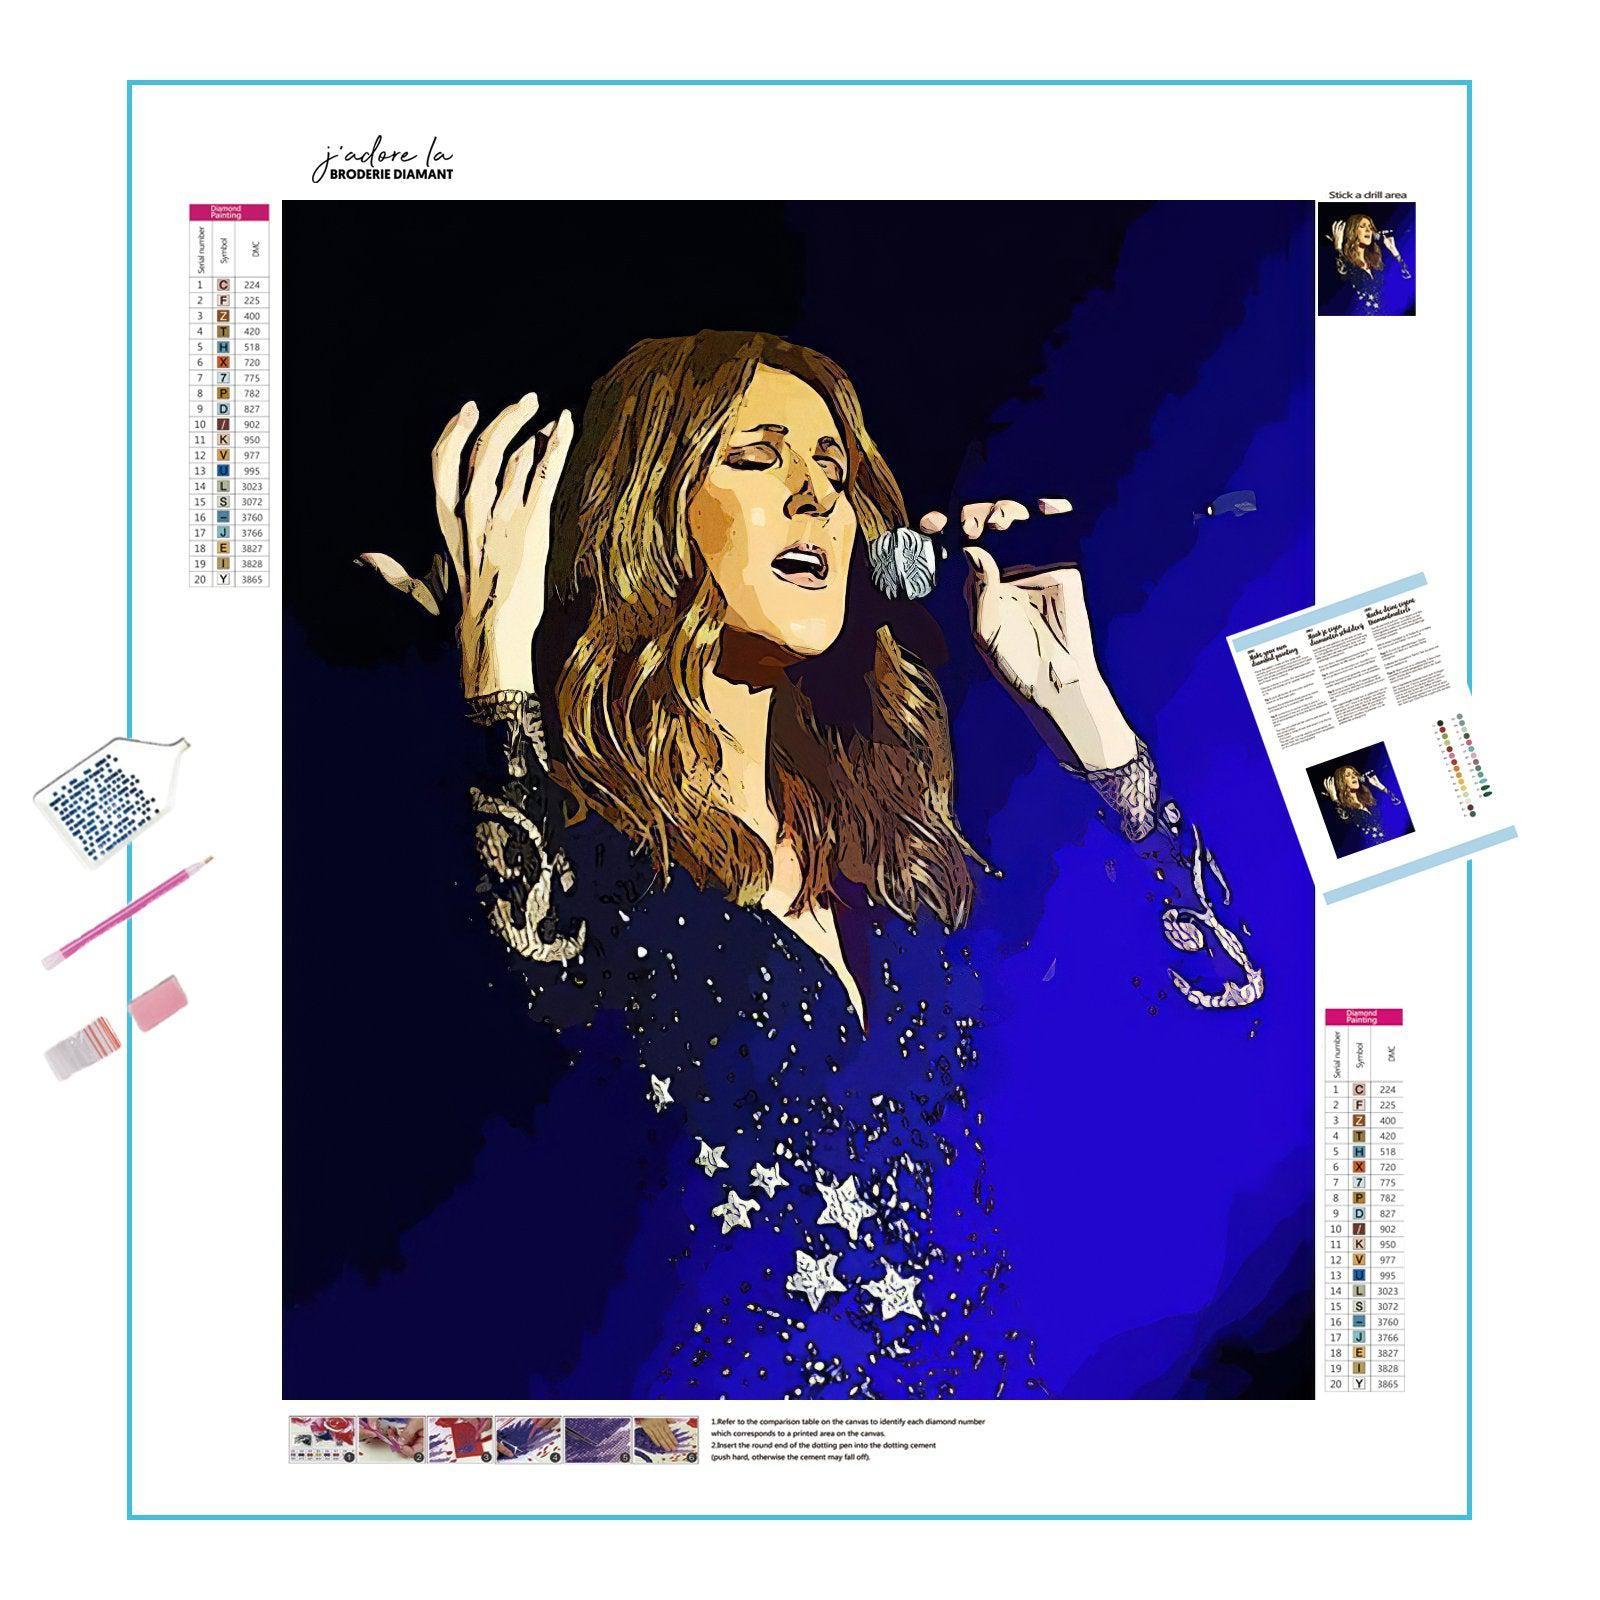 Celebrating Celine Dion, her powerful voice and emotive music that touch hearts worldwide.Celine Dion - Diamondartlove